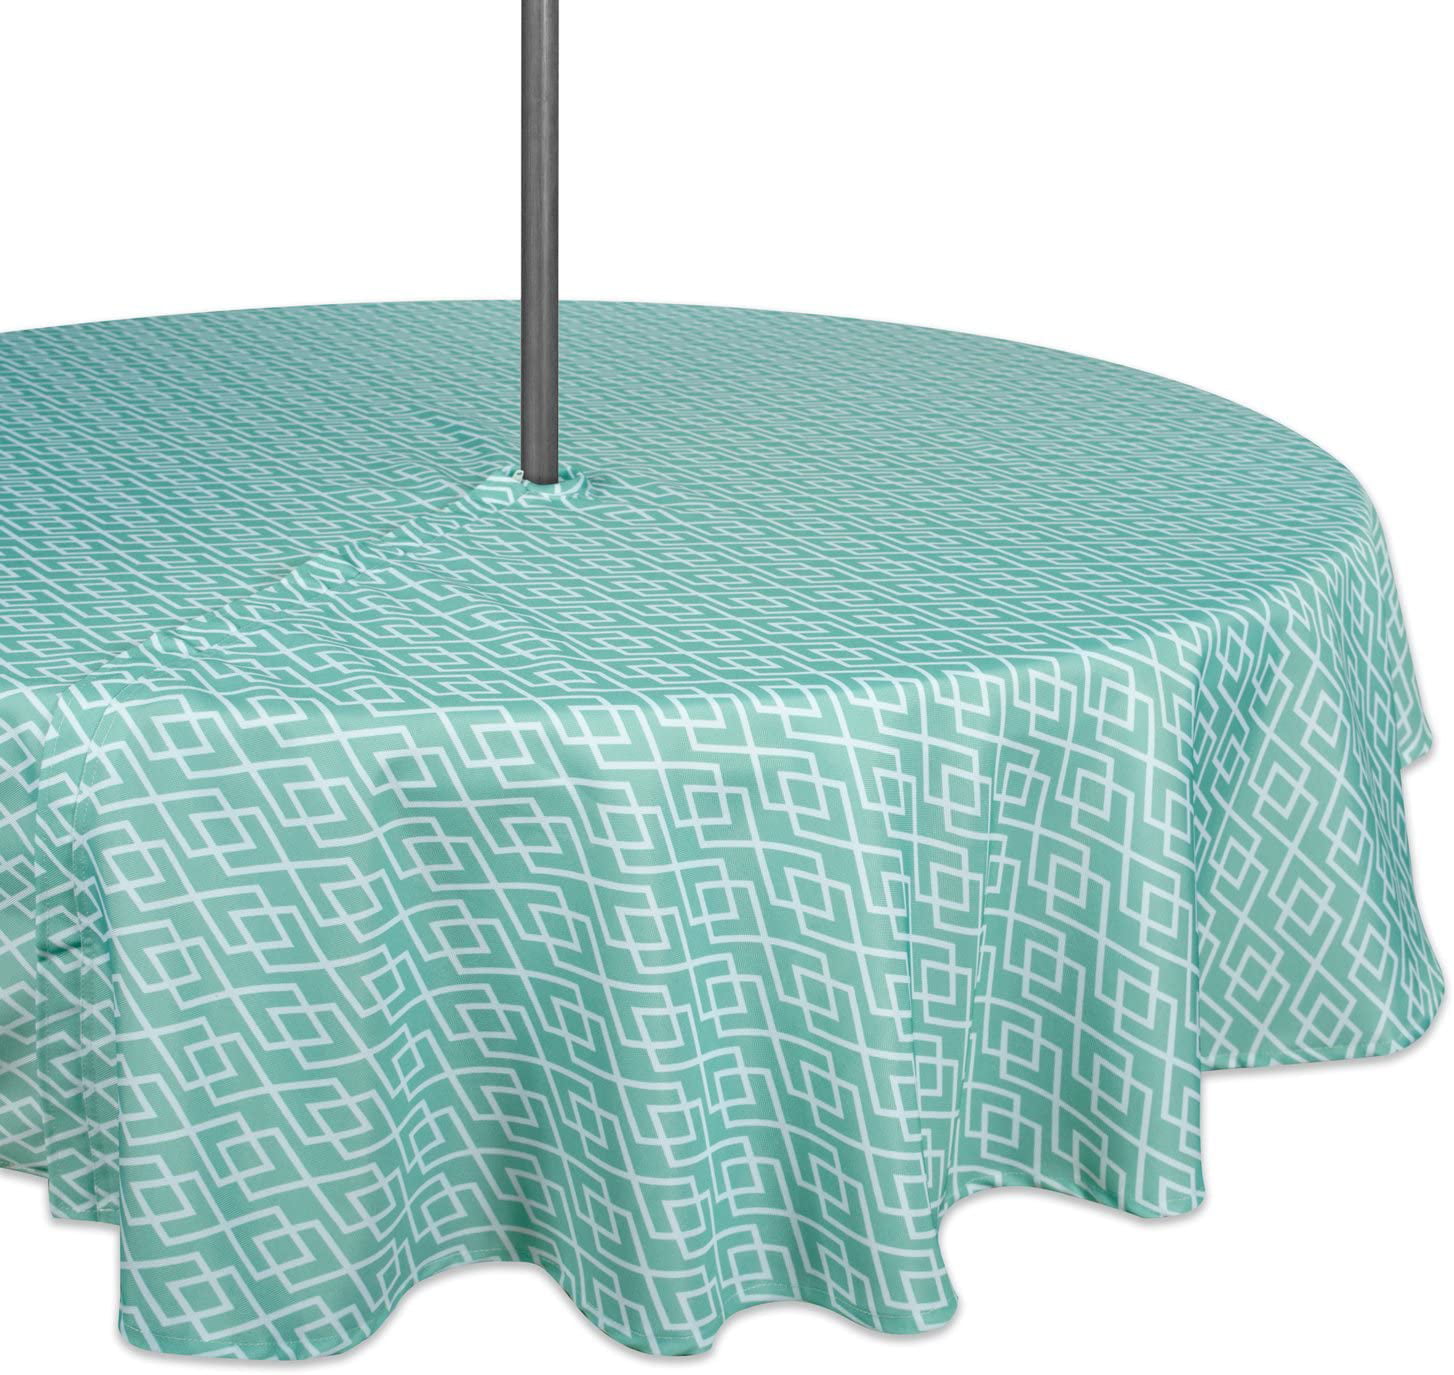 100% Polyester, Spill Proof, Machine Washable, Zipper Tablecloth for